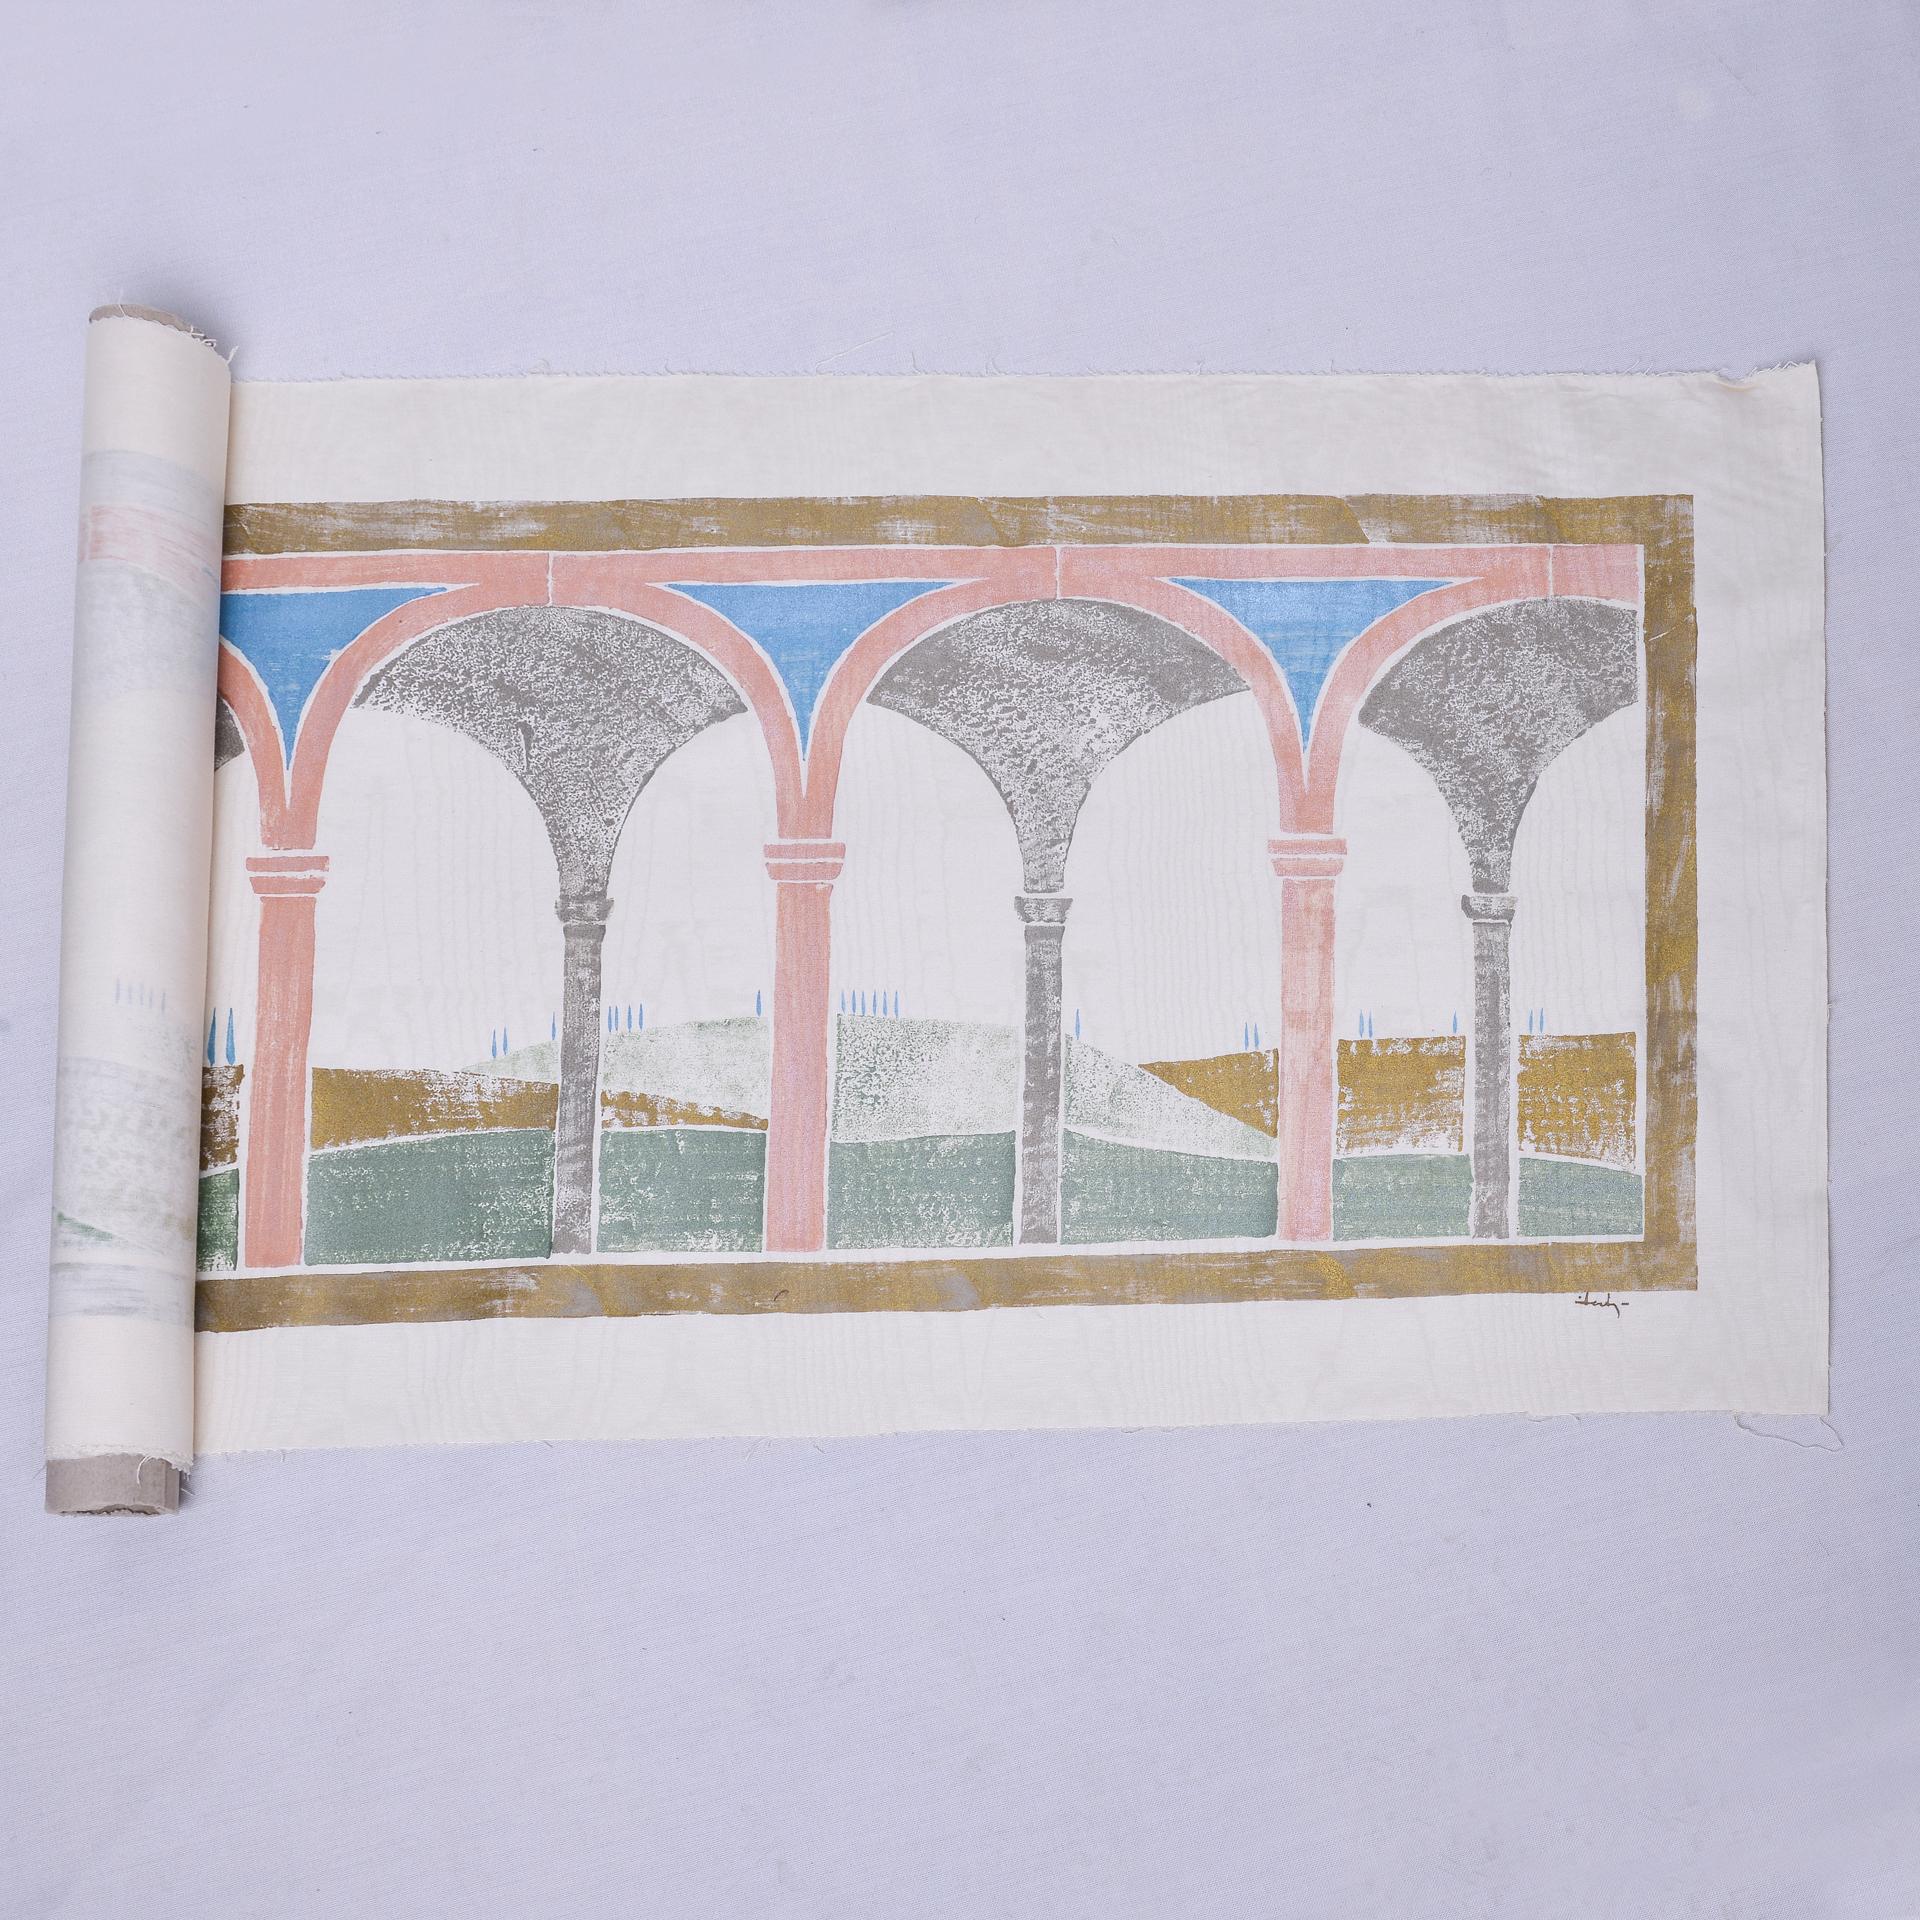 Hand printed tapestry on silk taffeta: by the italian architect Zocche in the 1980s, part of a now sold collection of Italian landscapes. i have not put the frame to facilitate shipping.